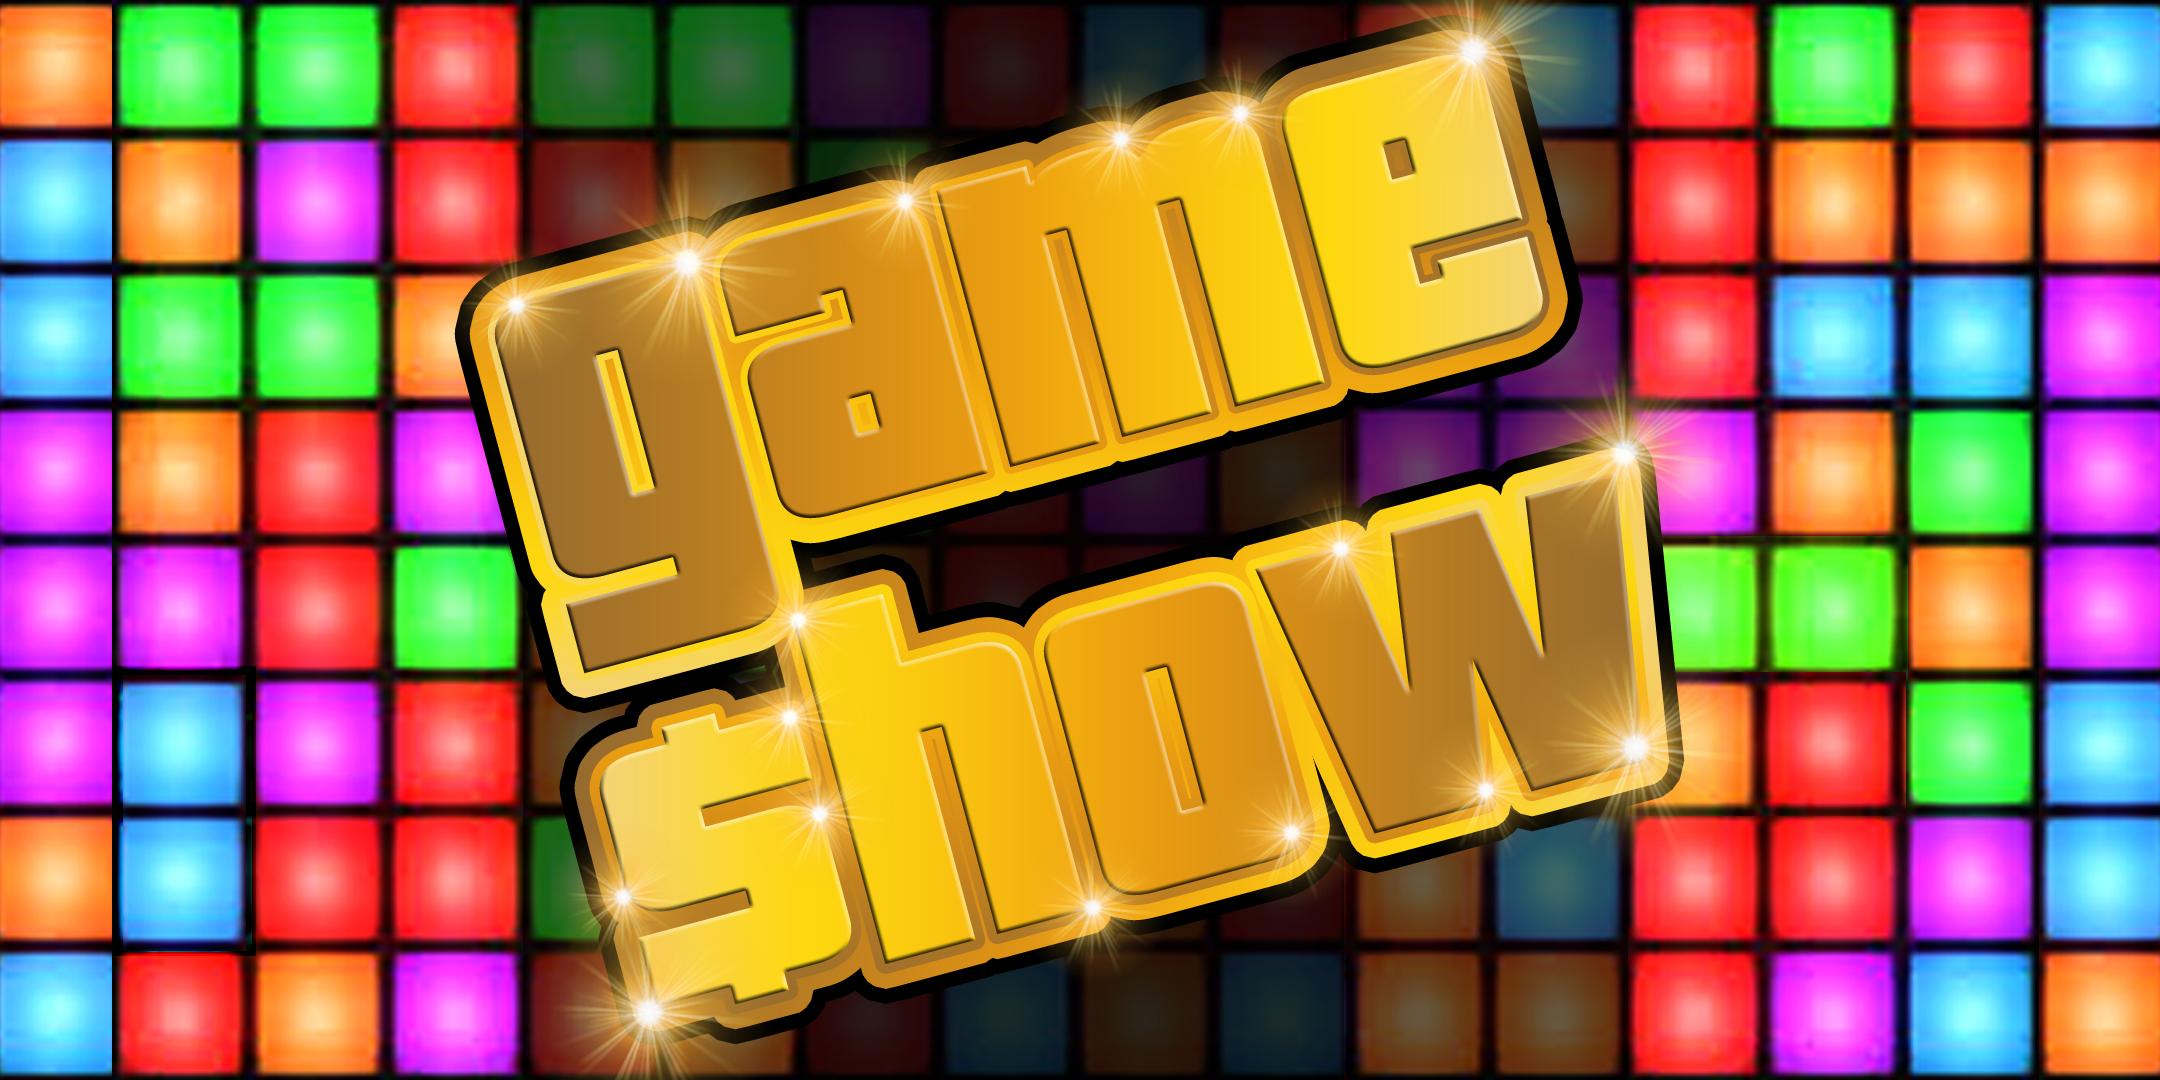 GAME SHOW - An interactive dinner event